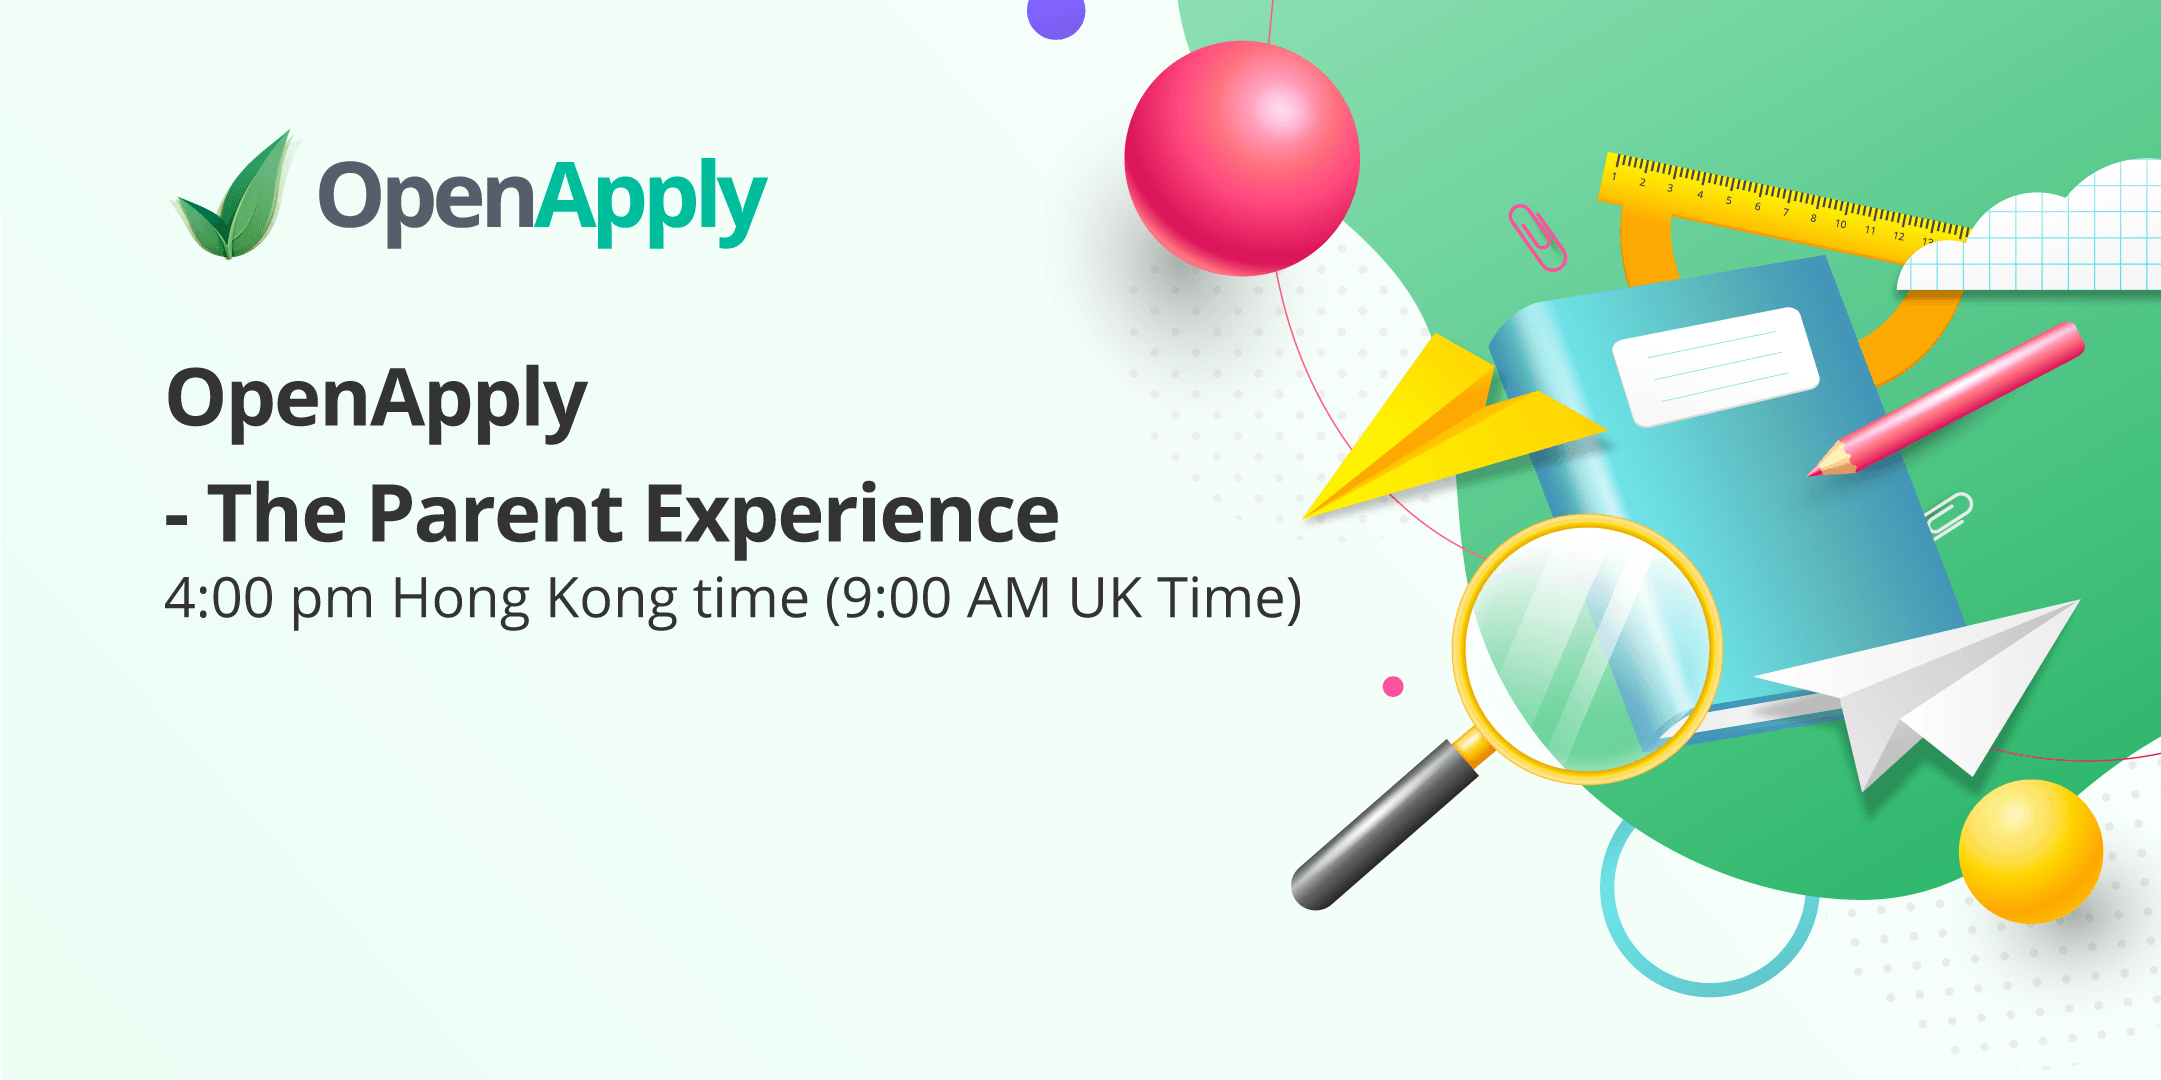 OpenApply - The Parent Experience